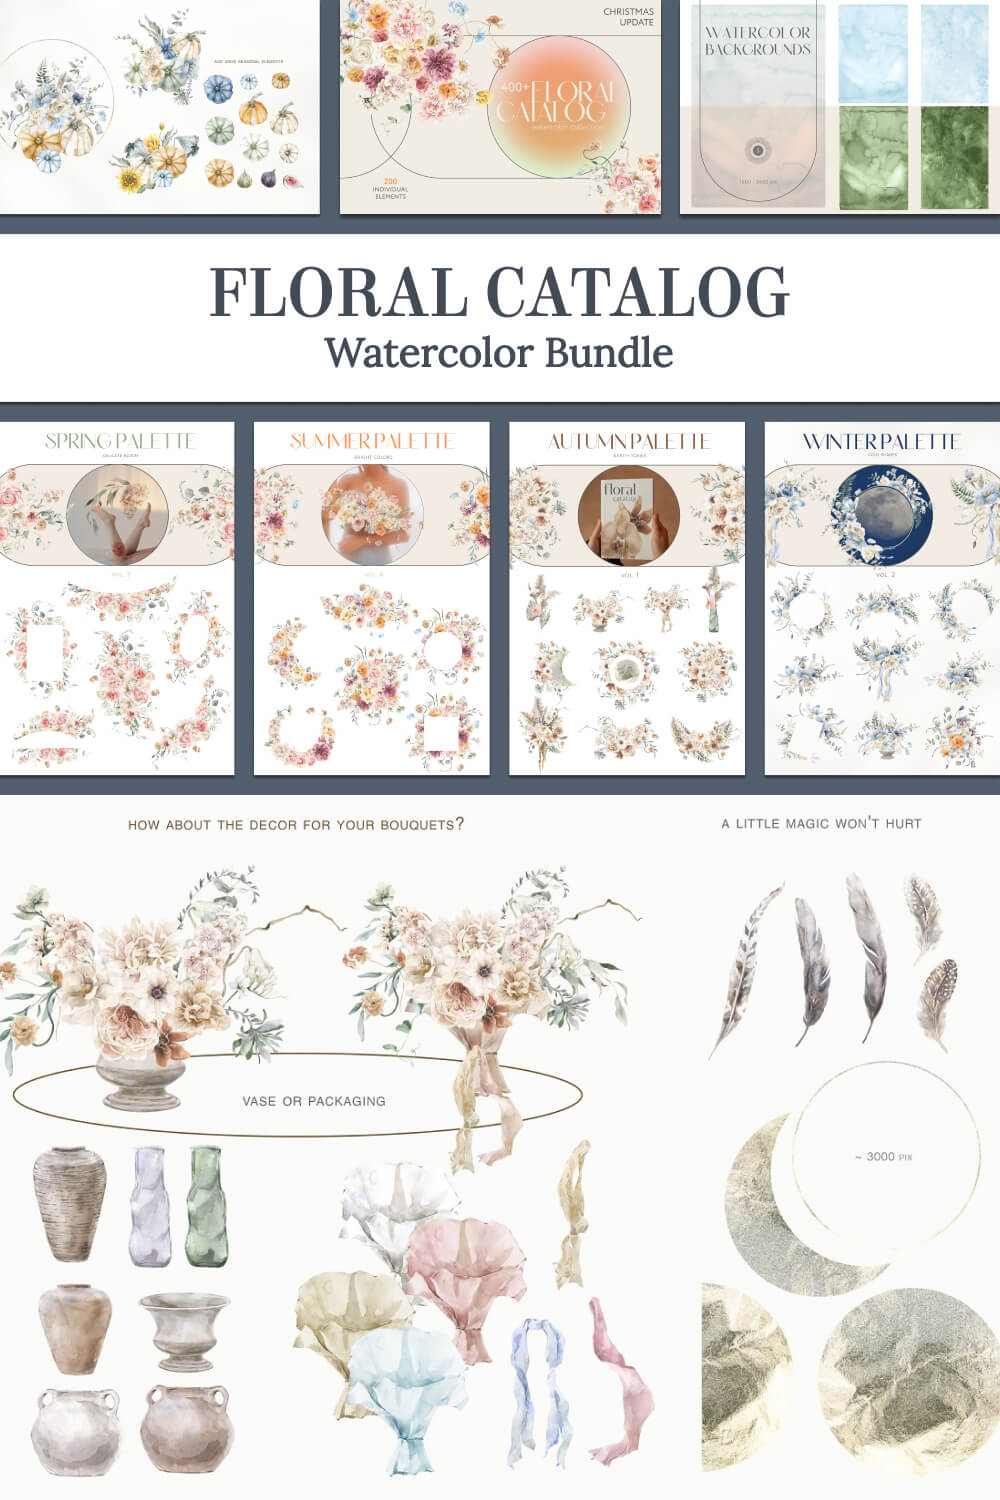 Big and small images of floral catalog.